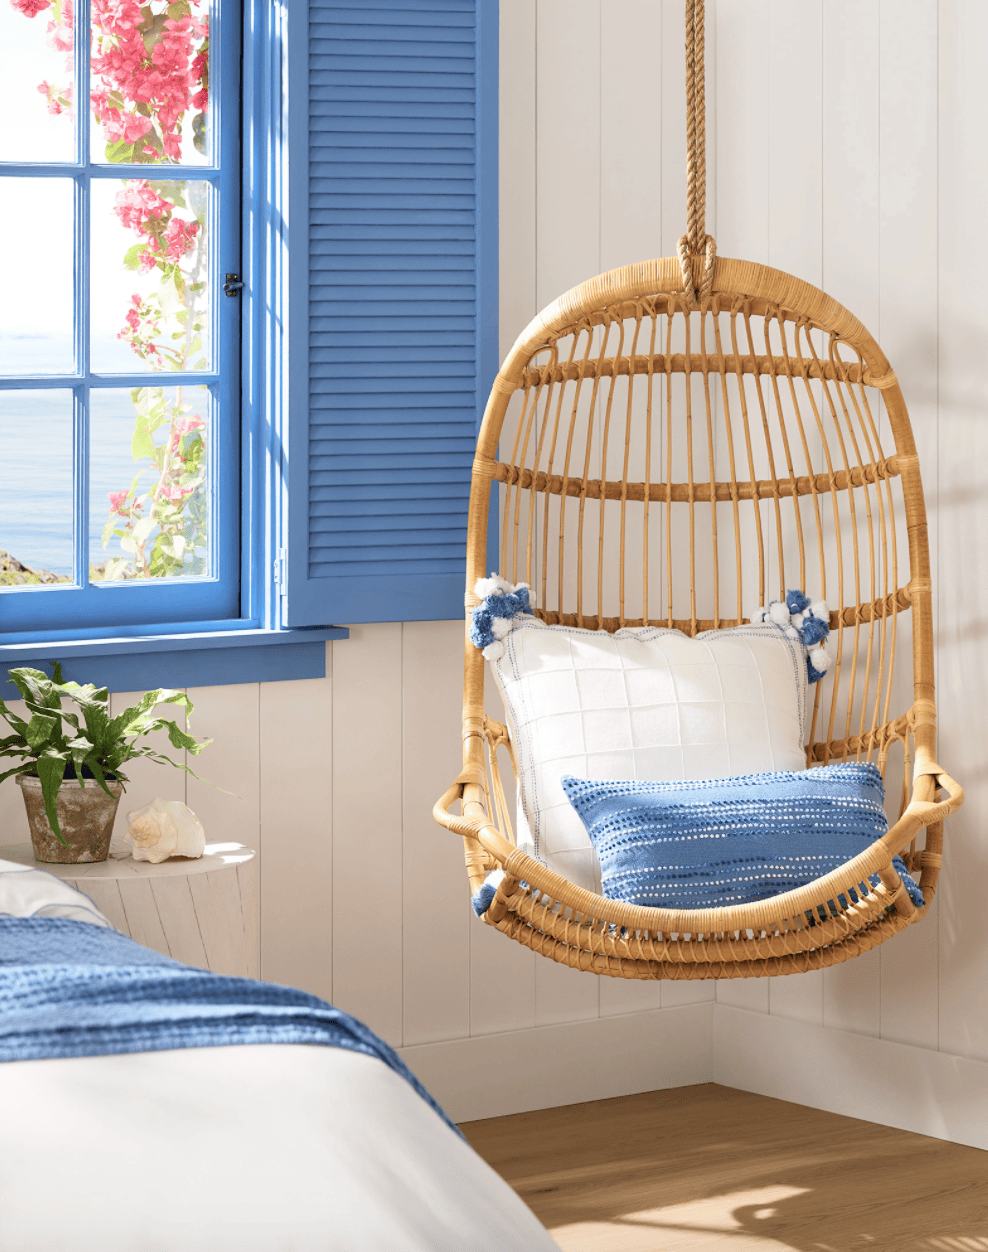 Rattan hanging swing in a light-filled room with blue pillows and accents